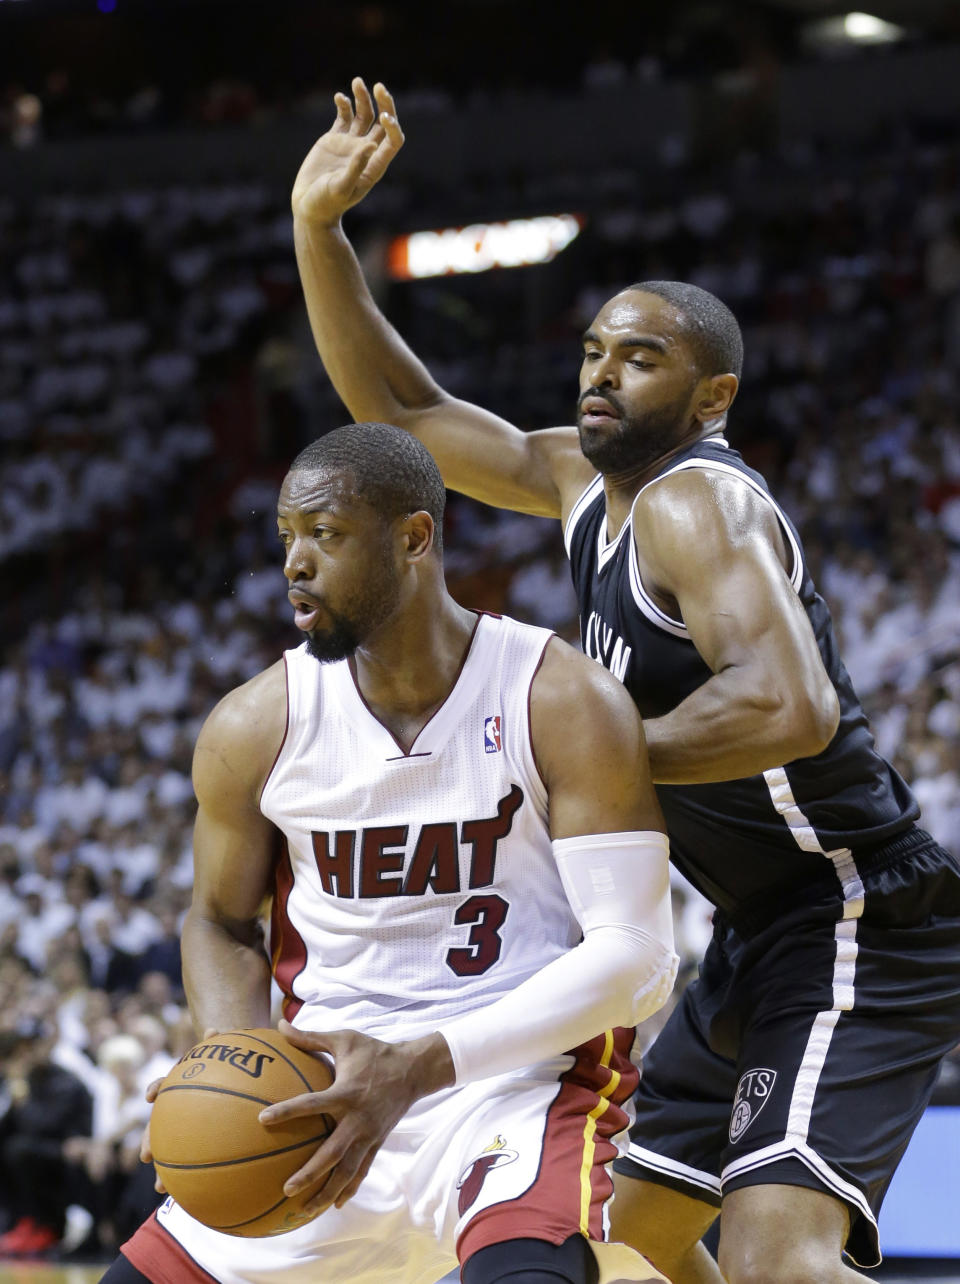 Miami Heat guard Dwyane Wade (3) looks for an open teammate as Brooklyn Nets forward Alan Anderson (6) defends during the first half of Game 2 of an Eastern Conference semifinal basketball game, Thursday, May 8, 2014 in Miami. (AP Photo/Wilfredo Lee)